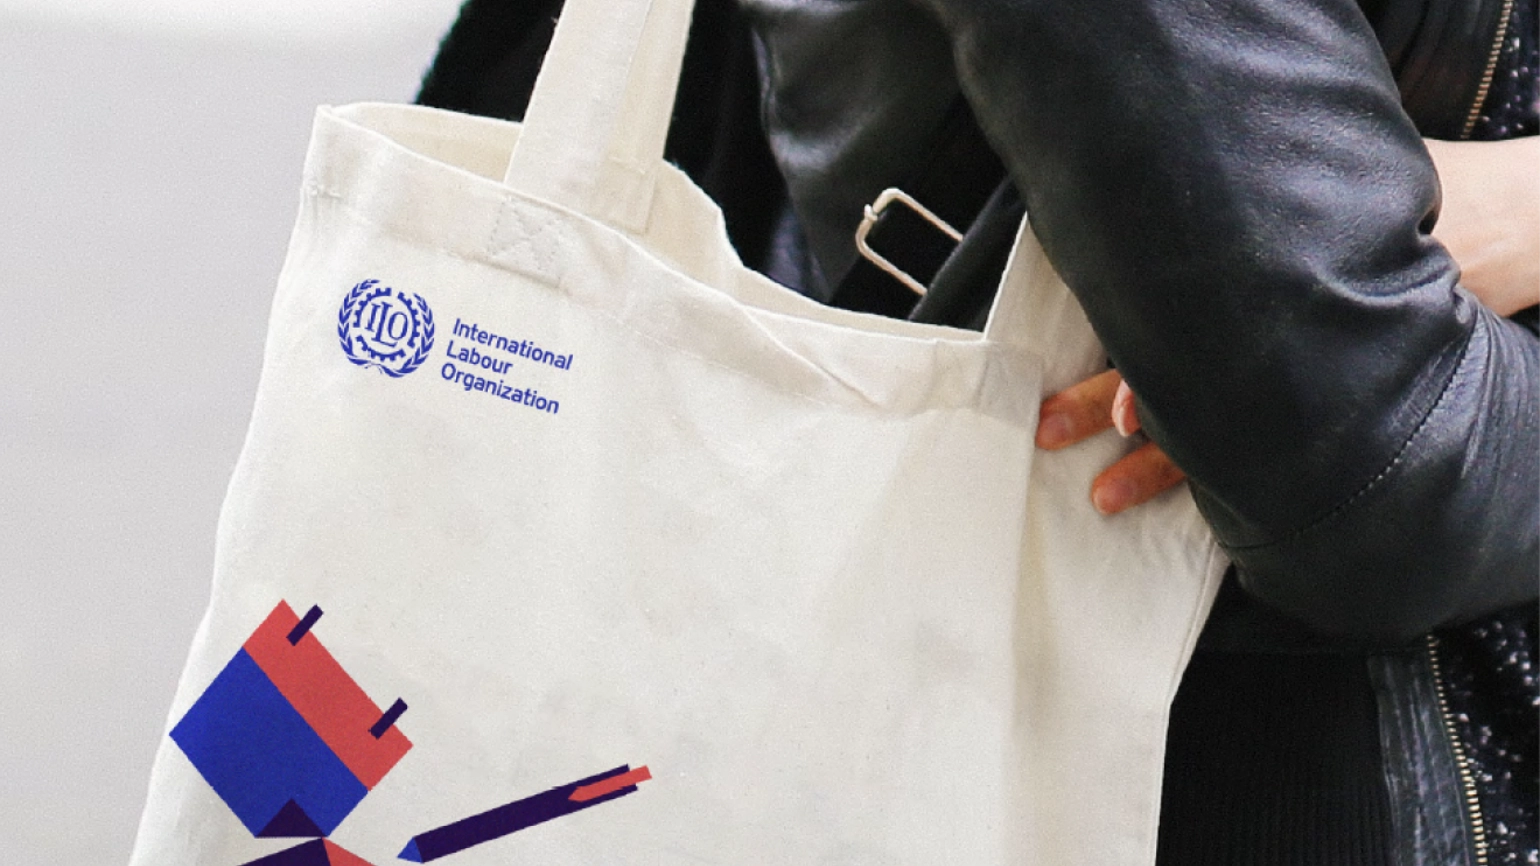 the mockup of ILO new branding on a tote bag